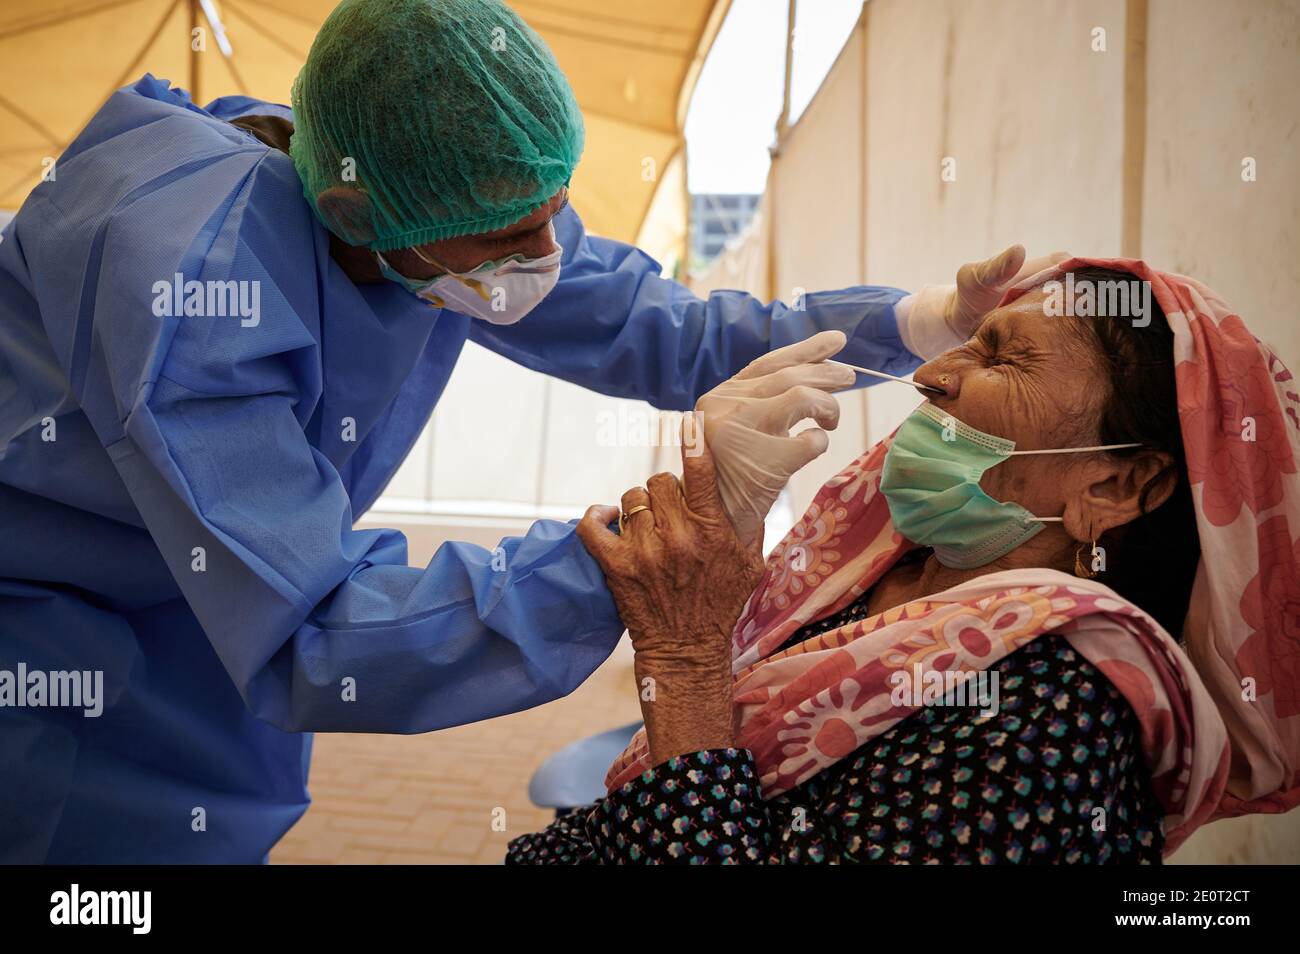 A lab technician dressed in full PPE gear, takes a nasal specimen from Kaneez Fatima, 60, TB client for a coronavirus test, at the Gori TB Clinic at the Indus Hospital in Korangi, Karachi, Pakistan. Stock Photo